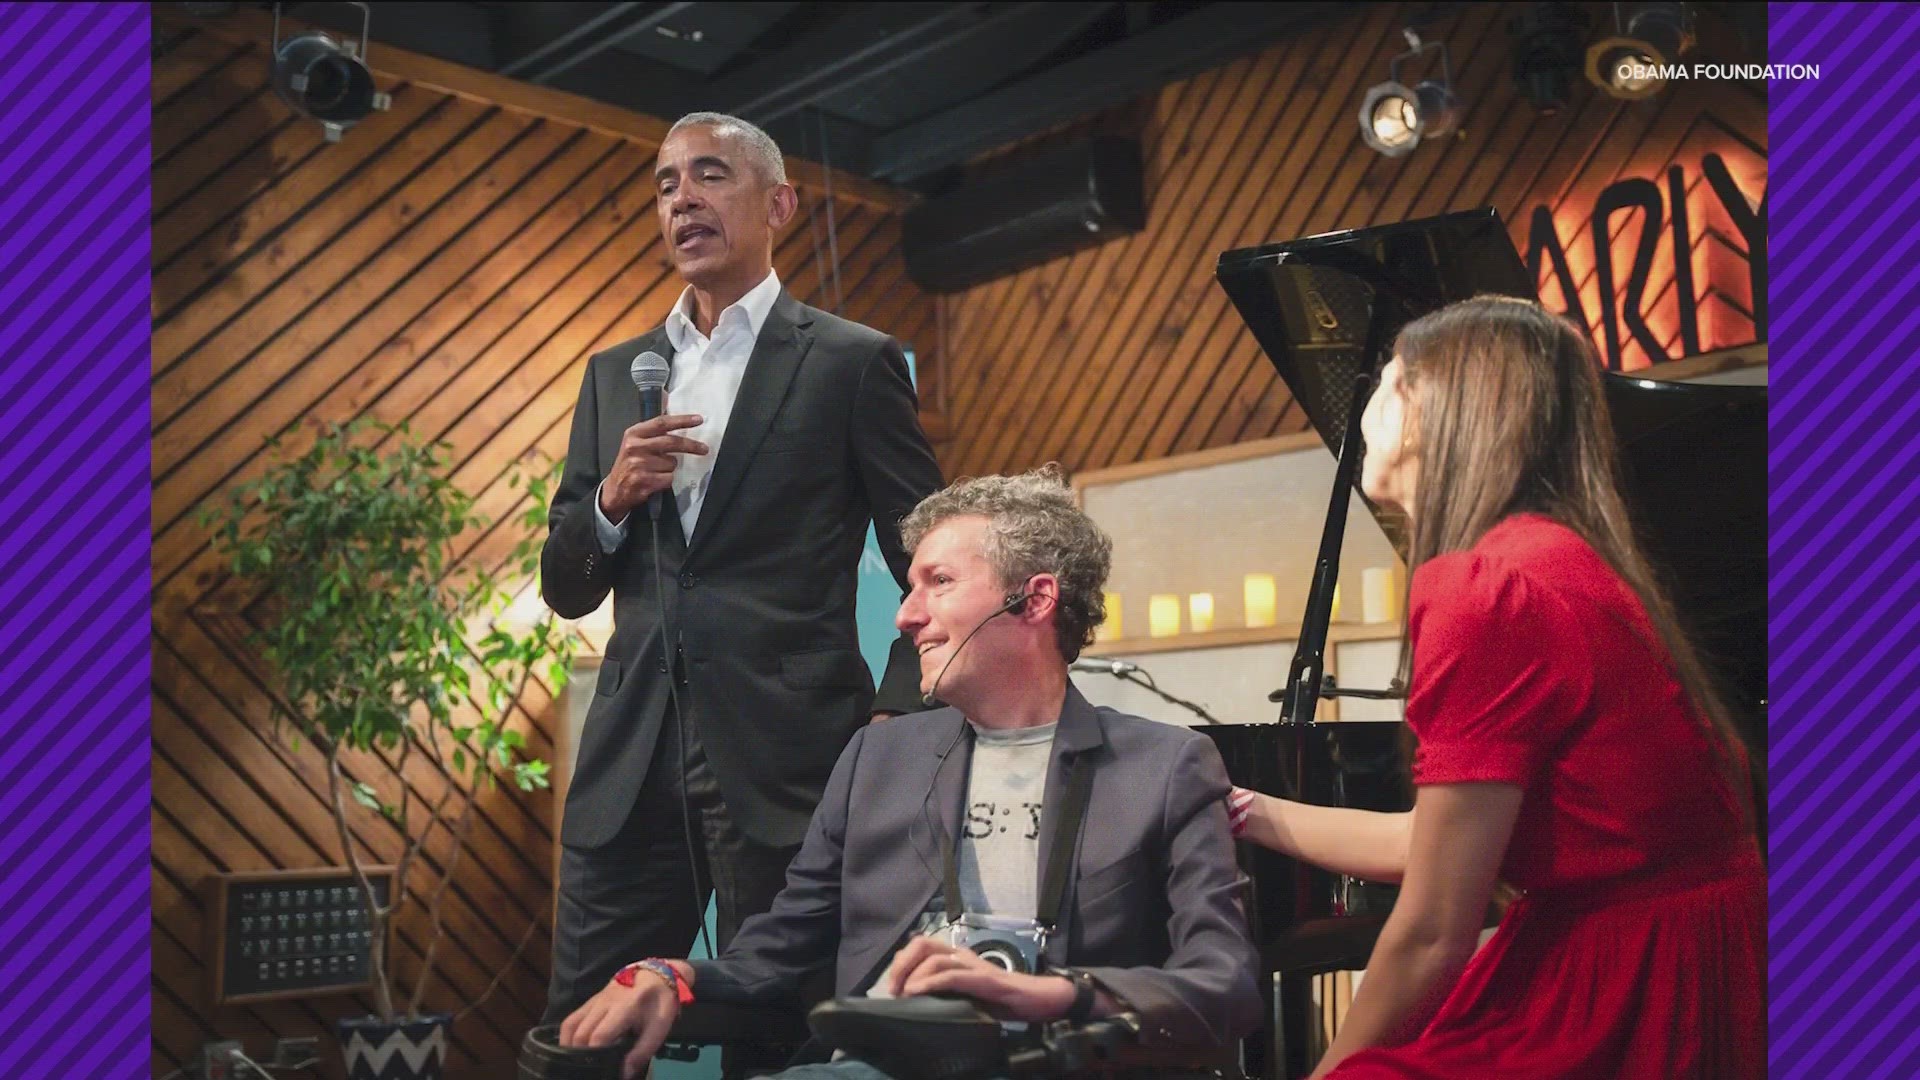 Former President Barack Obama attended the premiere of "No Ordinary Campaign," a documentary featuring two of his former staffers.